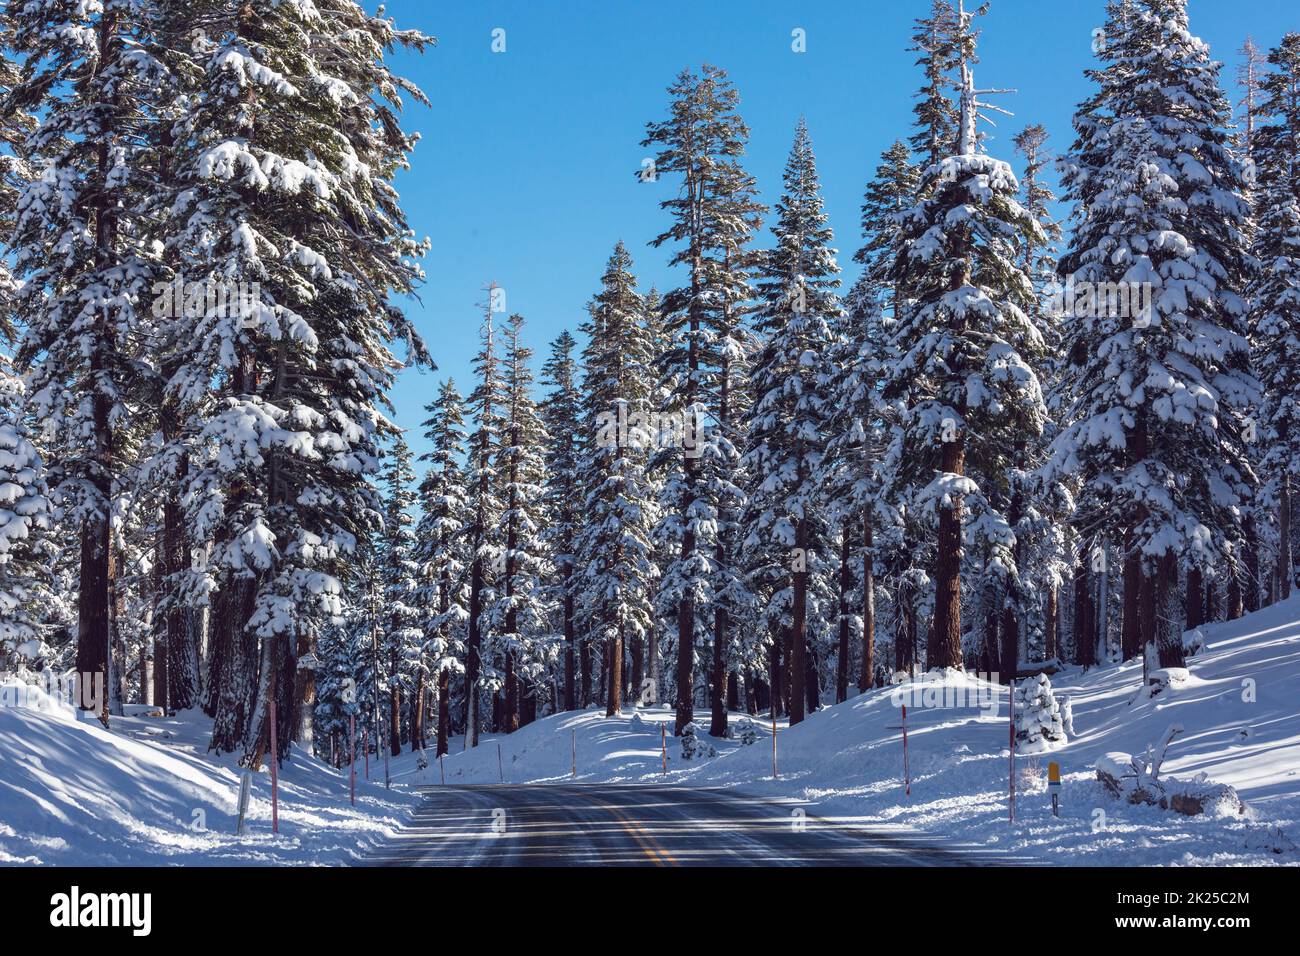 Scenic snow-covered forest in winter season. Good for Christmas background. Stock Photo